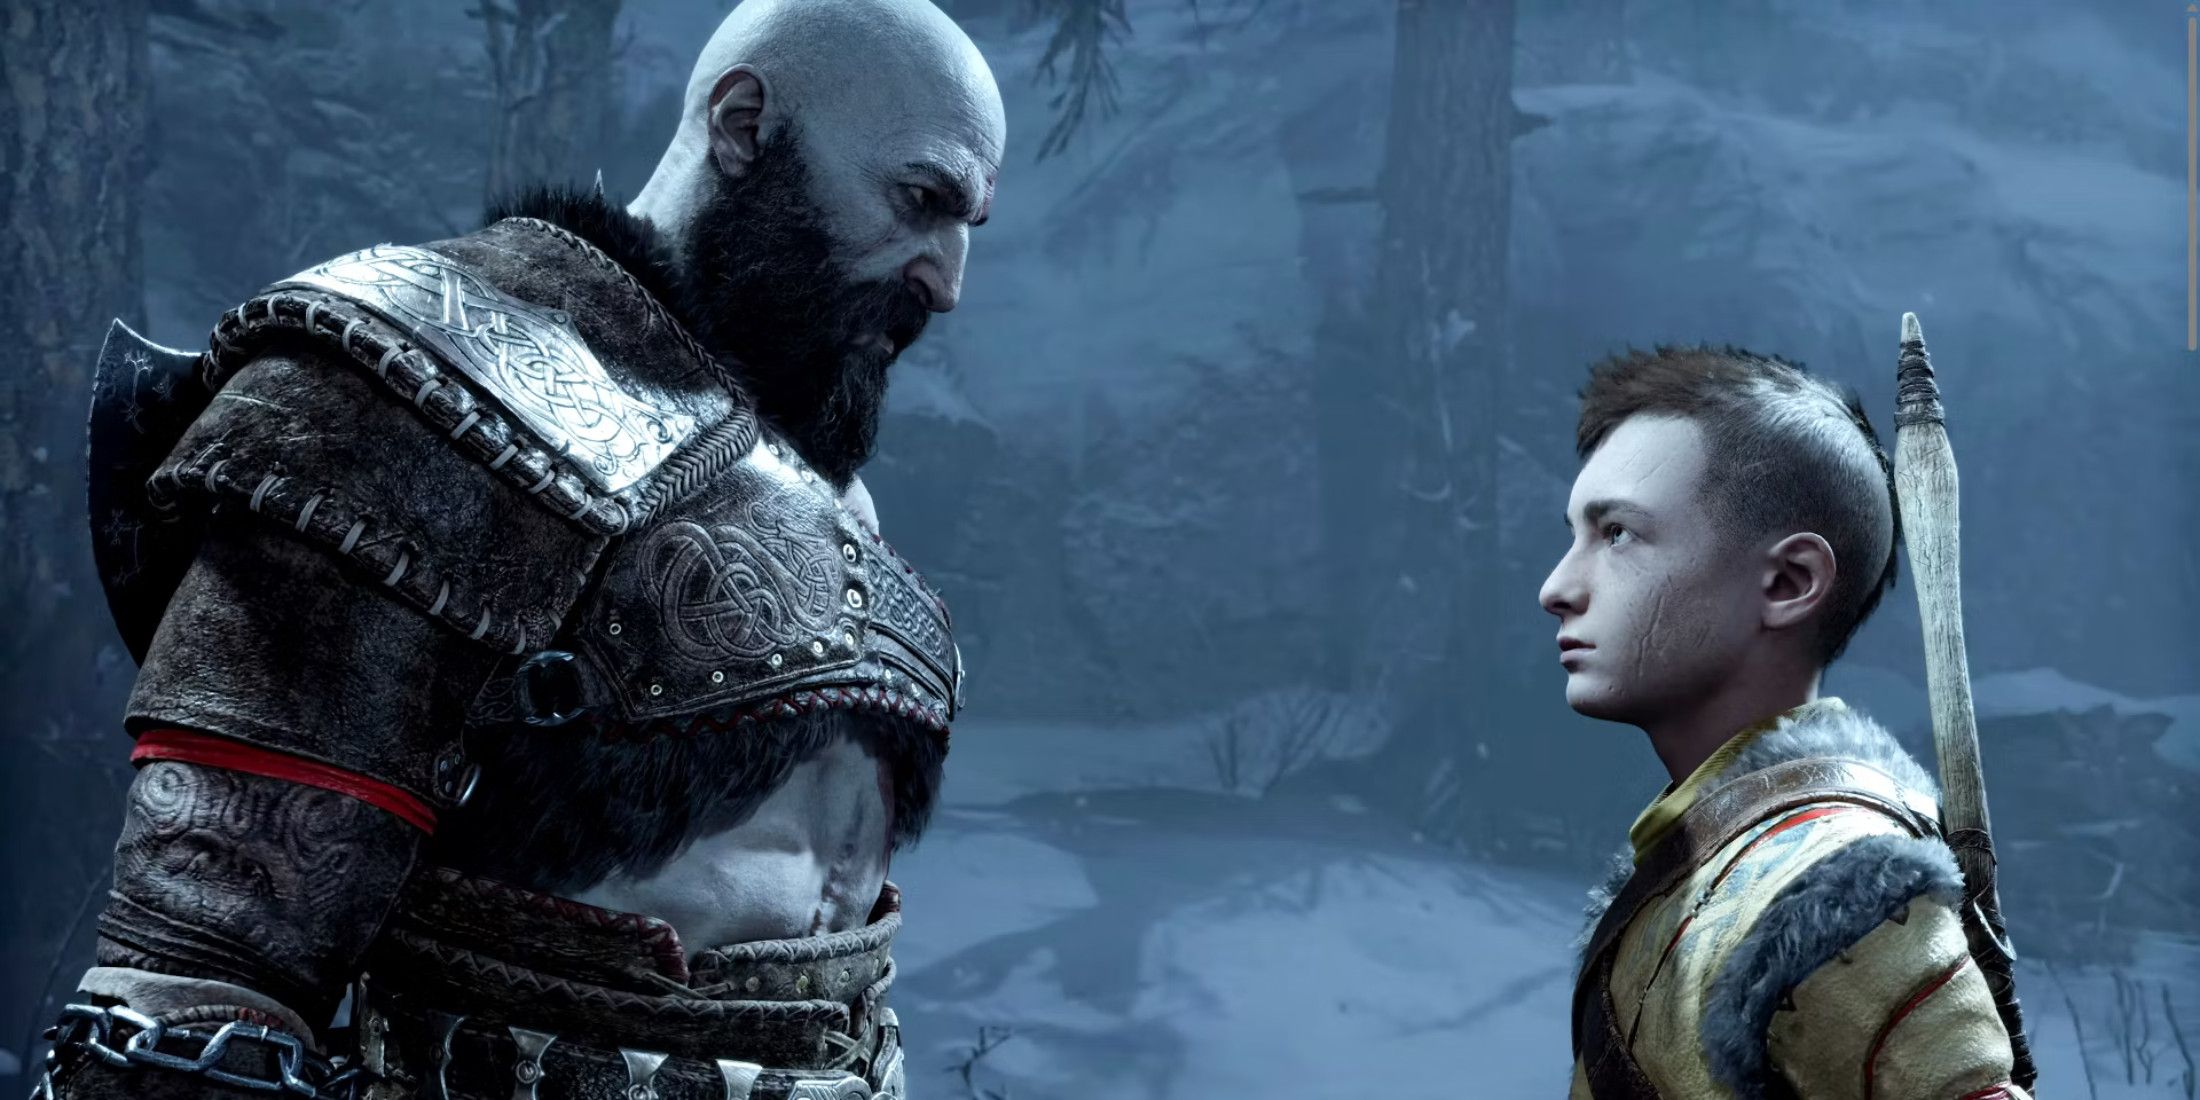 Why the separation of Kratos and Atreus in God of War would be a double-edged sword